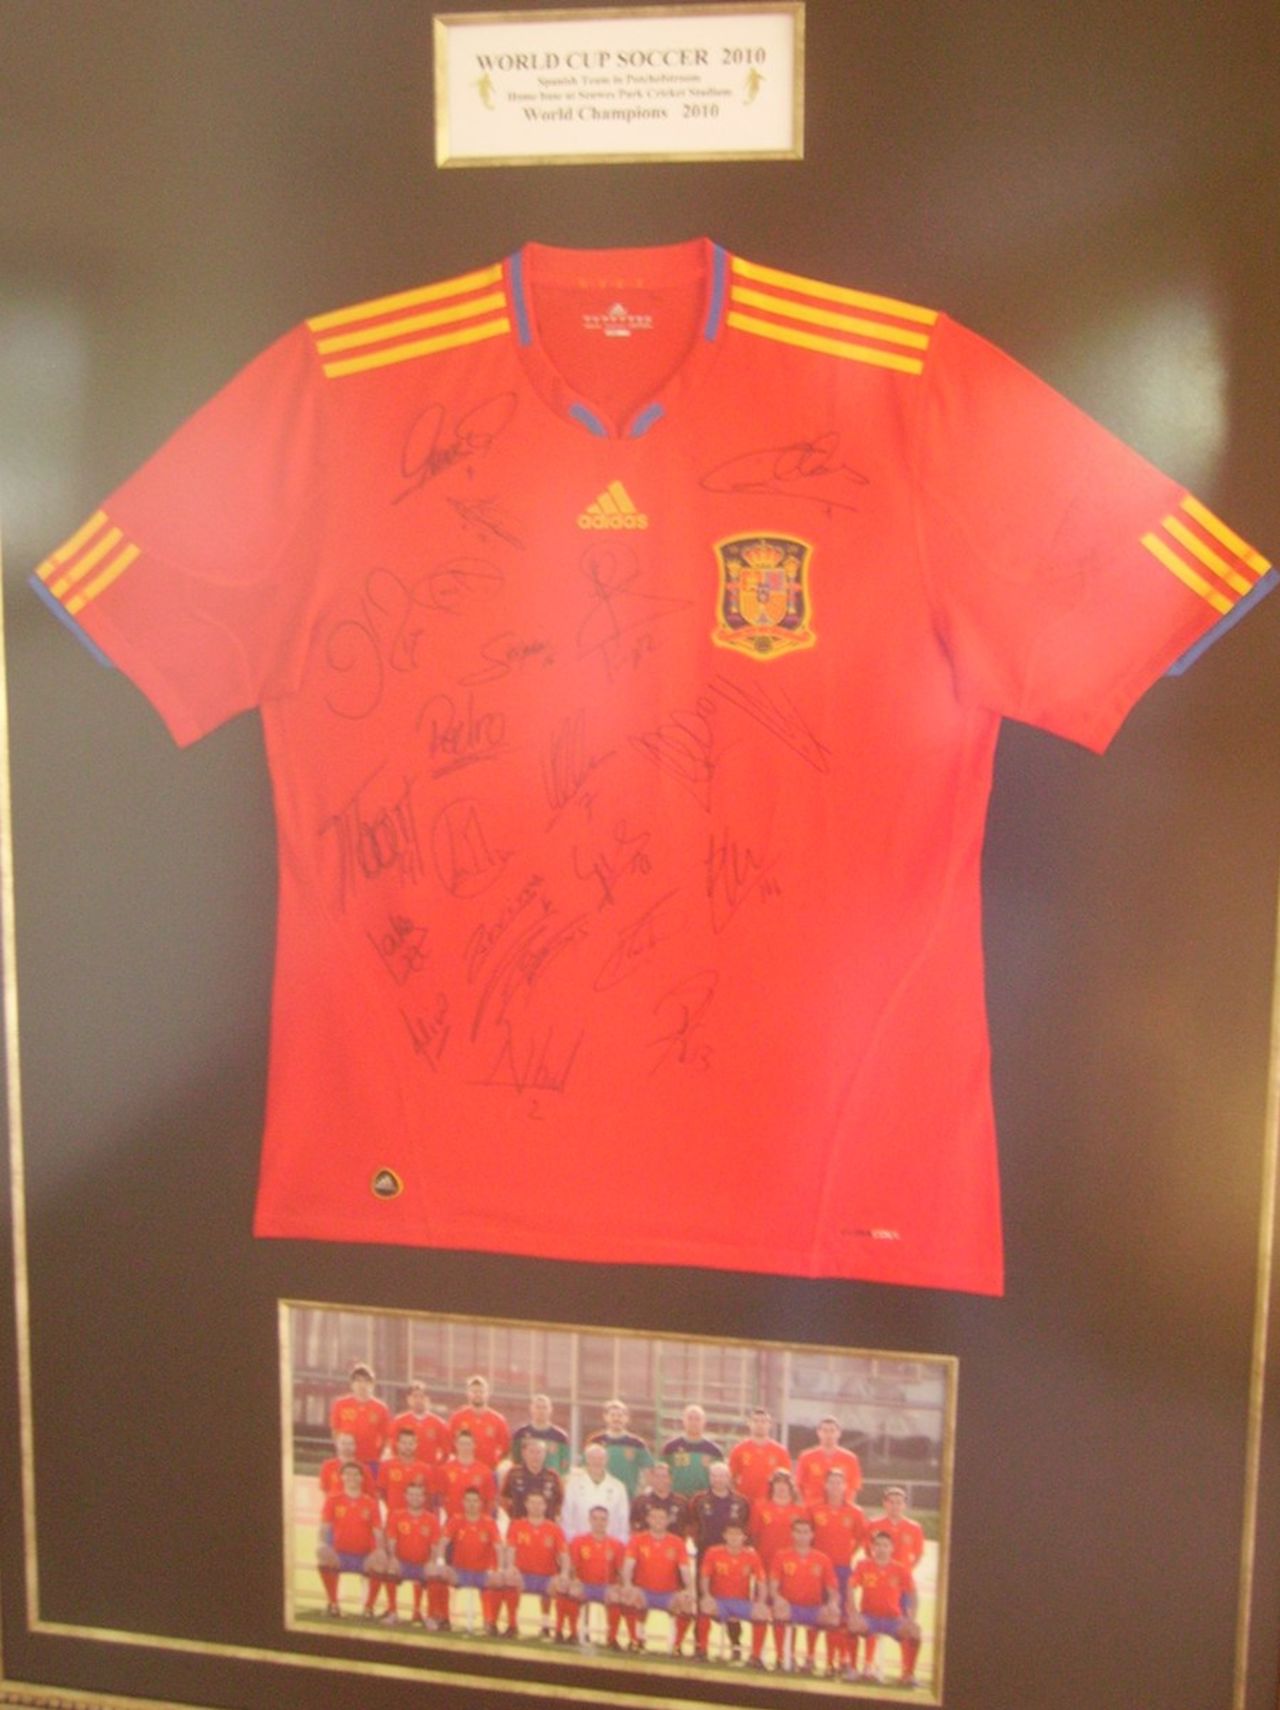 A Spain 2010 World Cup football jersey in Senwes Park, Potchefstroom, November 3, 2011